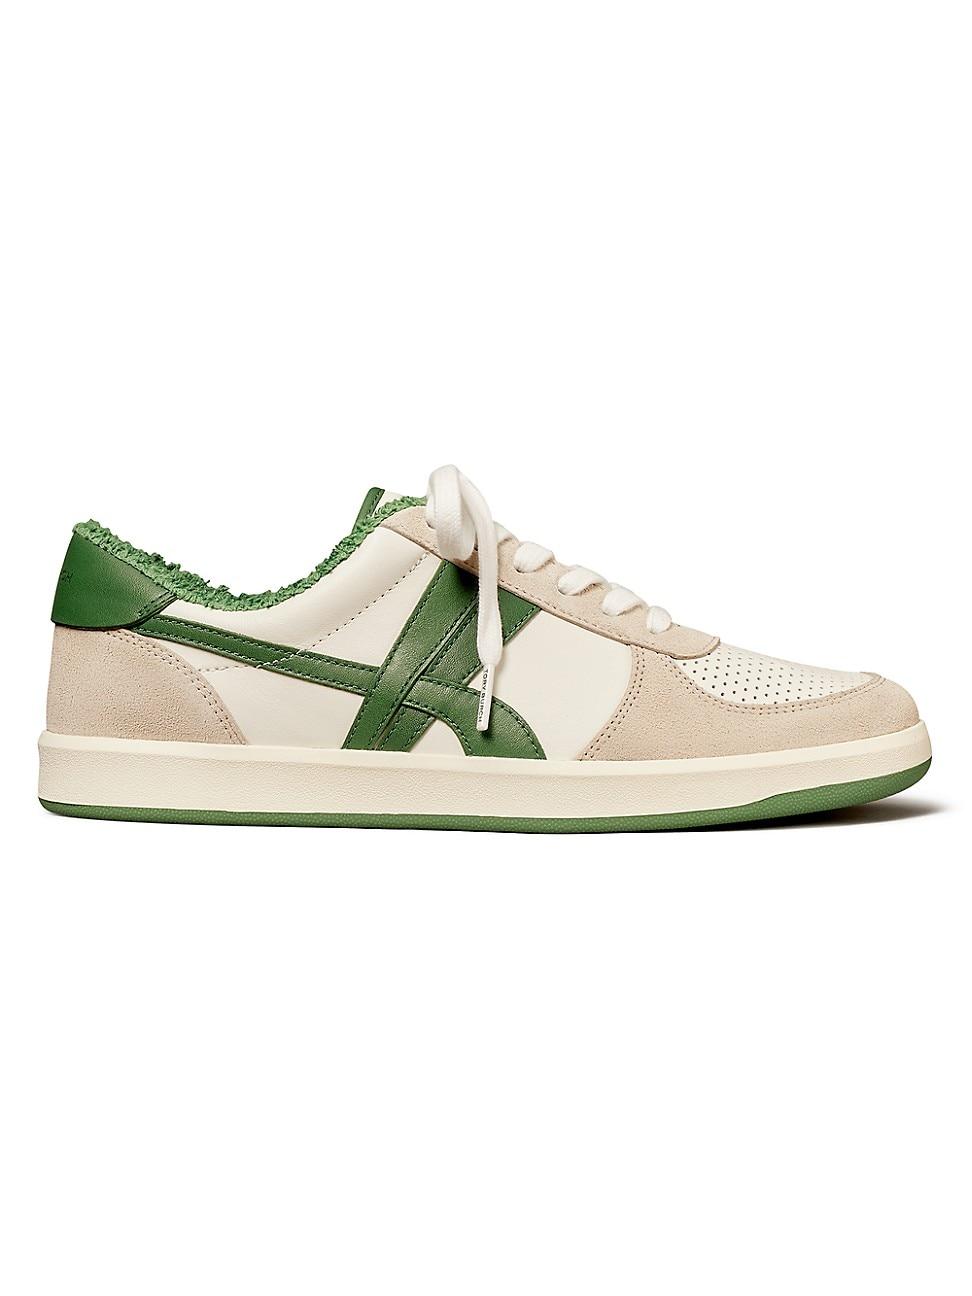 Tory Burch Hank Suede & Leather Court Sneakers in Natural | Lyst